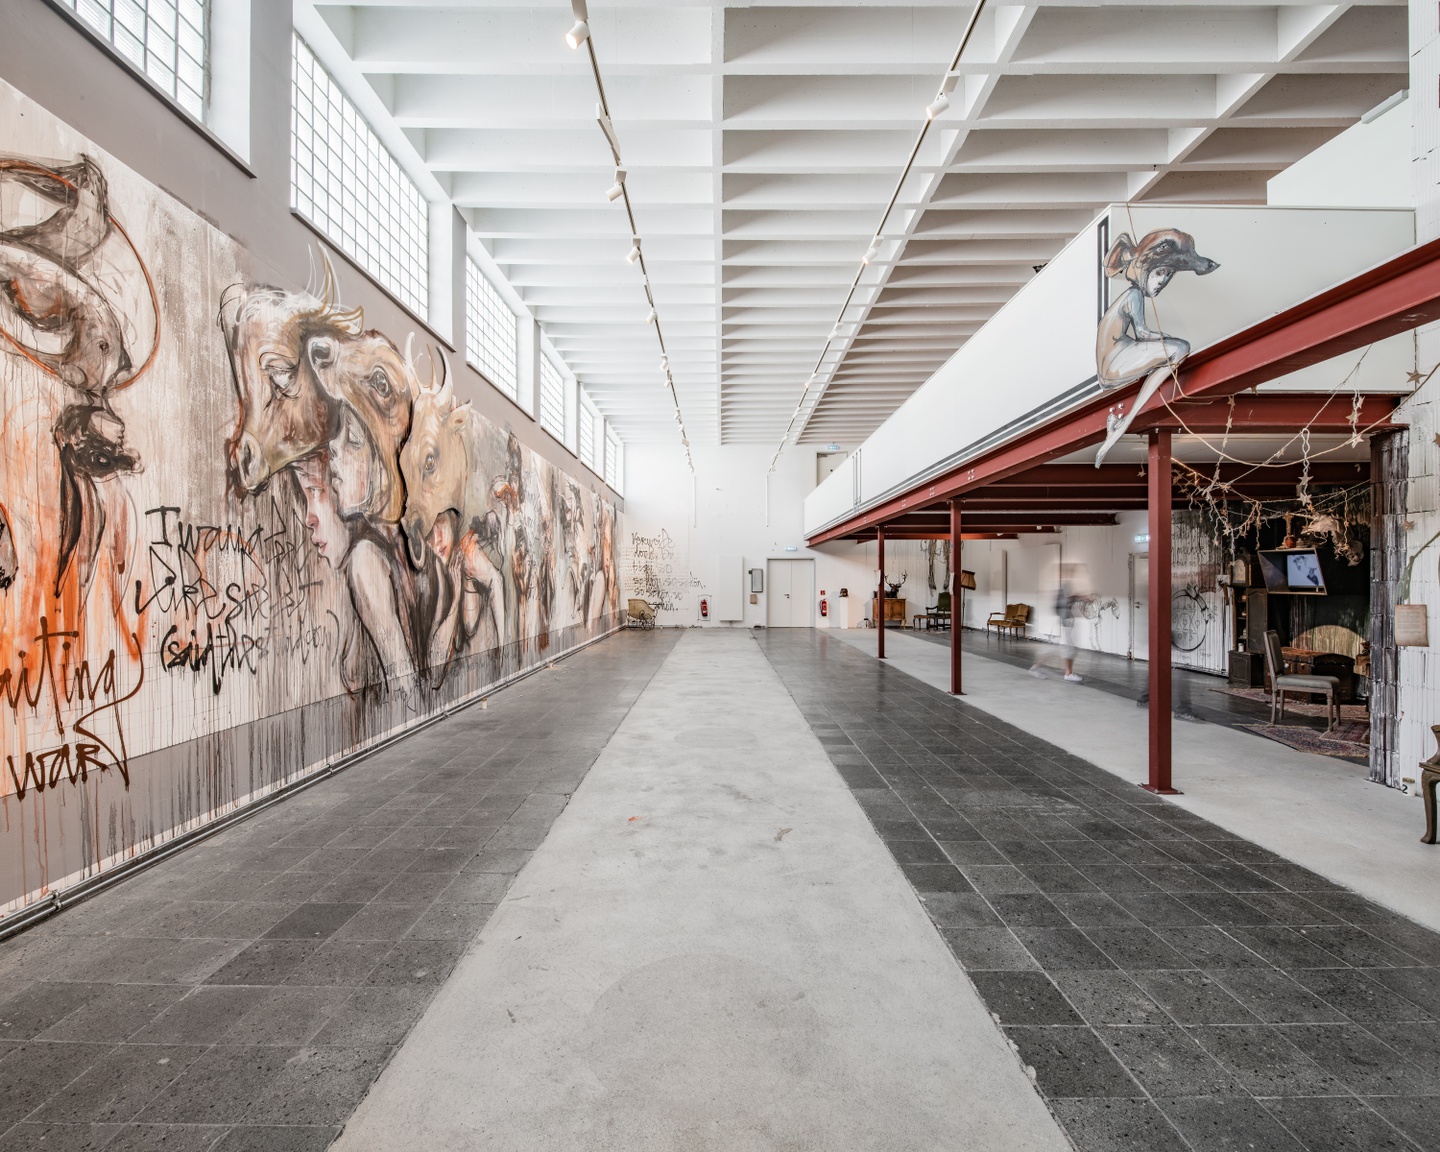 Interior of a museum space with industrial-windows and an iron framework. One wall displays a large-scale painting that is a hybrid of graffiti and cave painting.